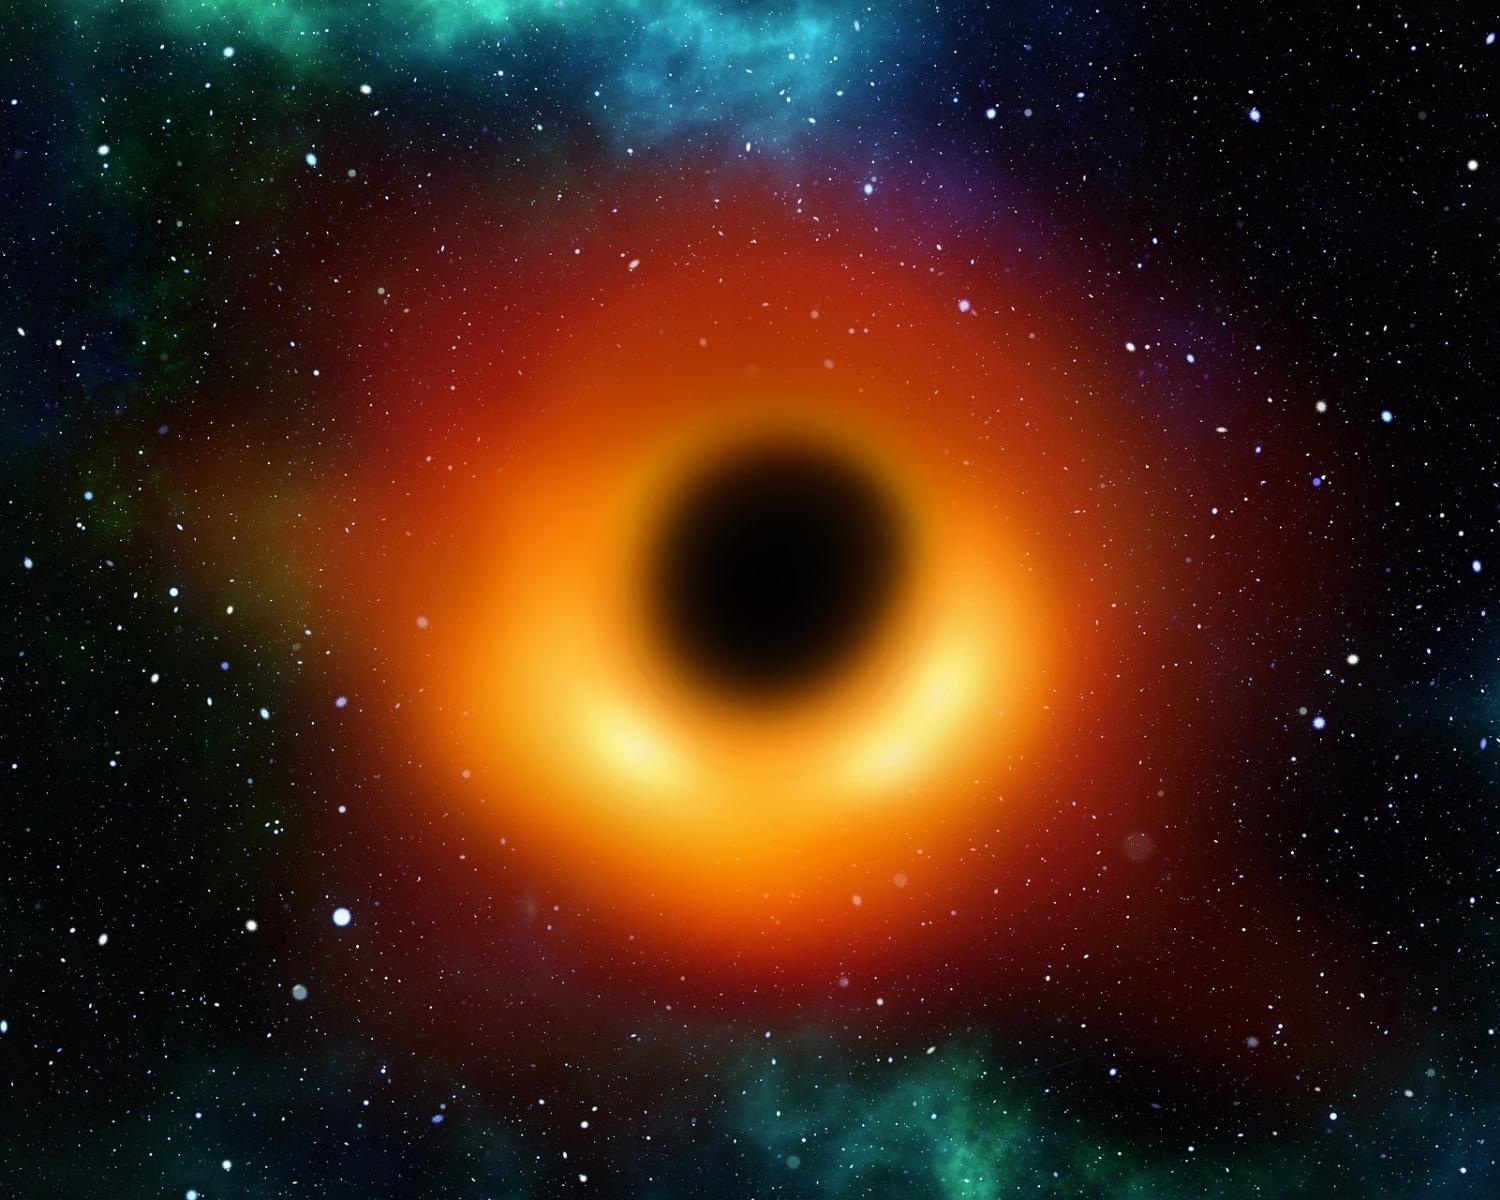 BLACK HOLE - Is it REAL?